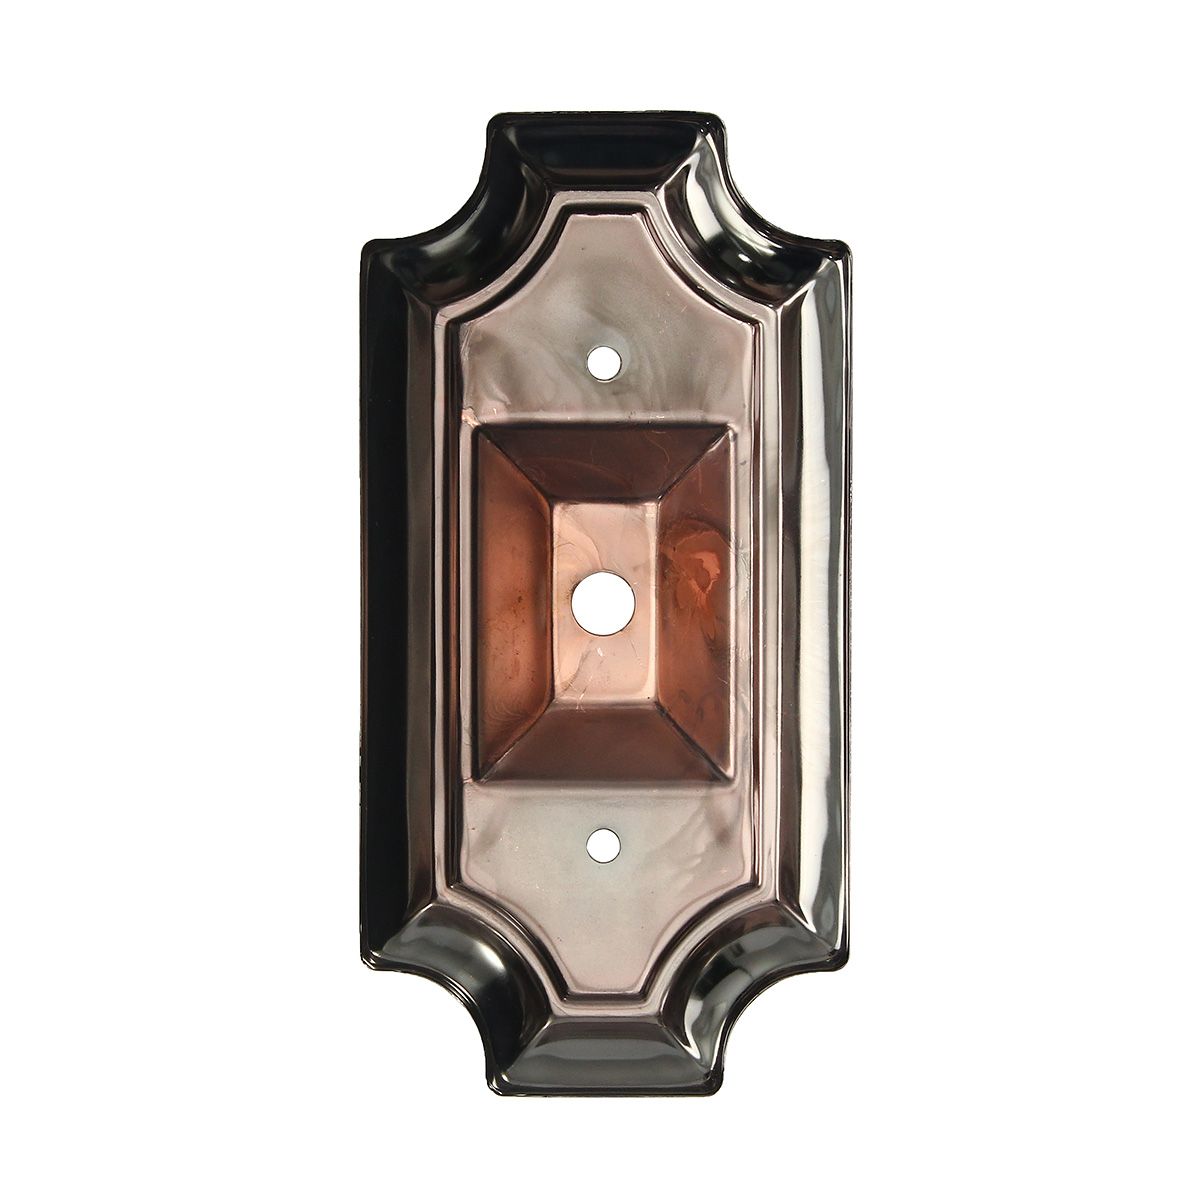 Retro-Vintage-Rectangle-Style-Sconce-Wall-Lamp-Light-Base-Part-Replacement-Mount-Fixture-1112739